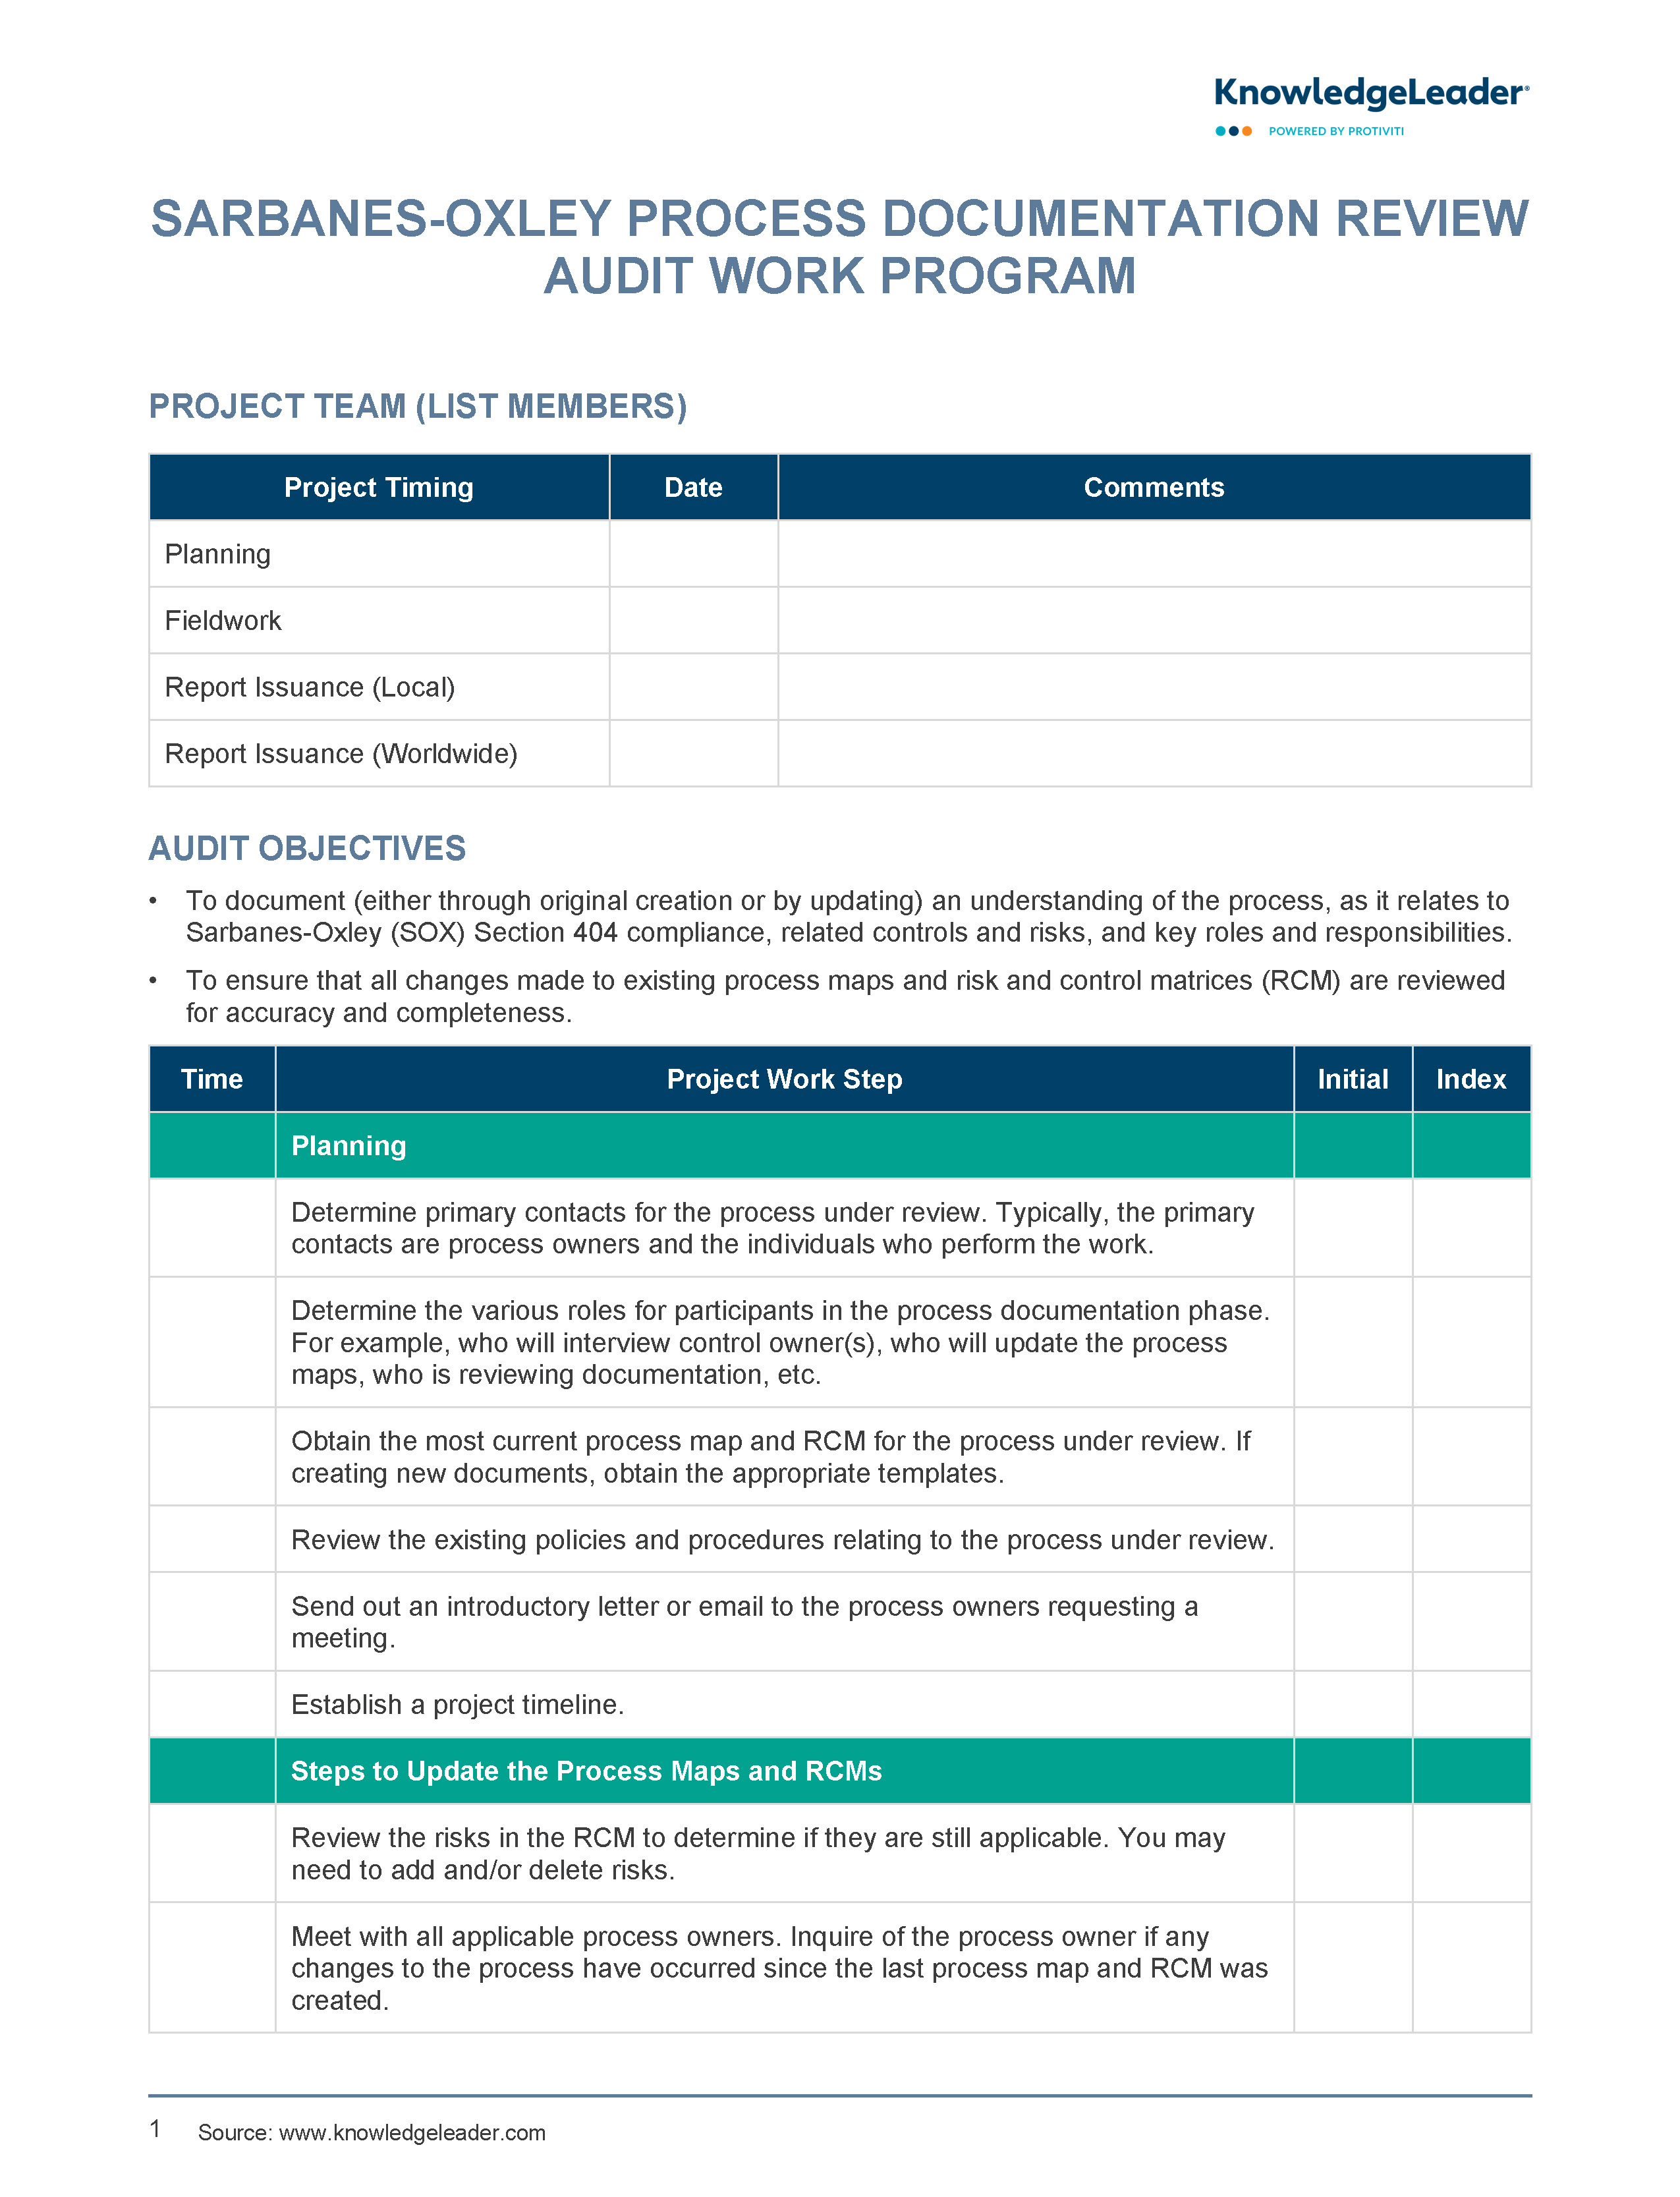 Screenshot of the first page of SOX Process Documentation Review Audit Work Program